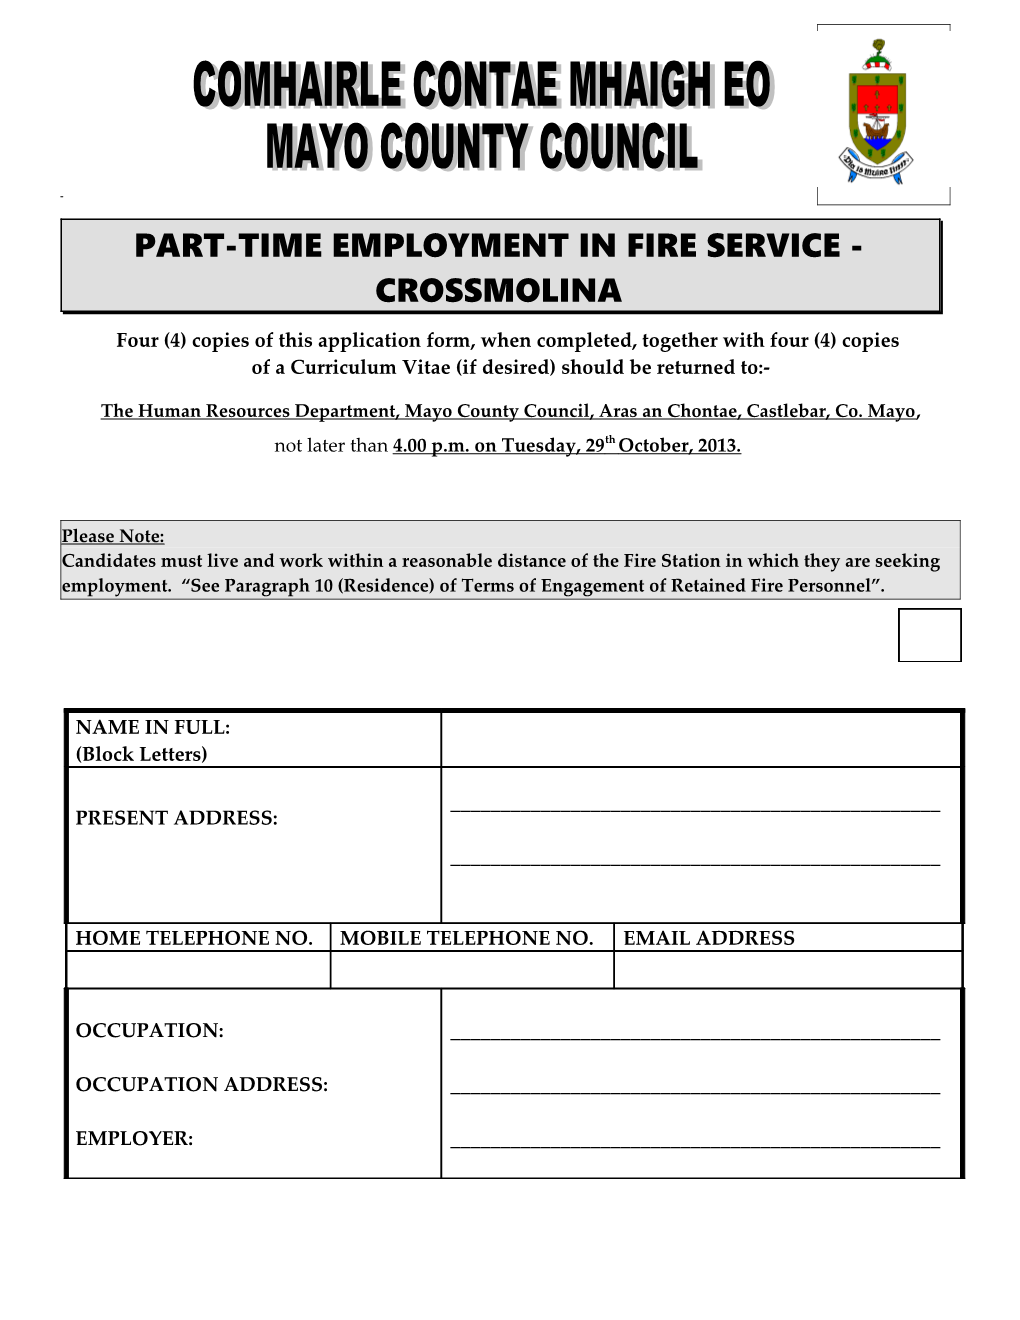 Part-Time Employment in Fire Service - Crossmolina